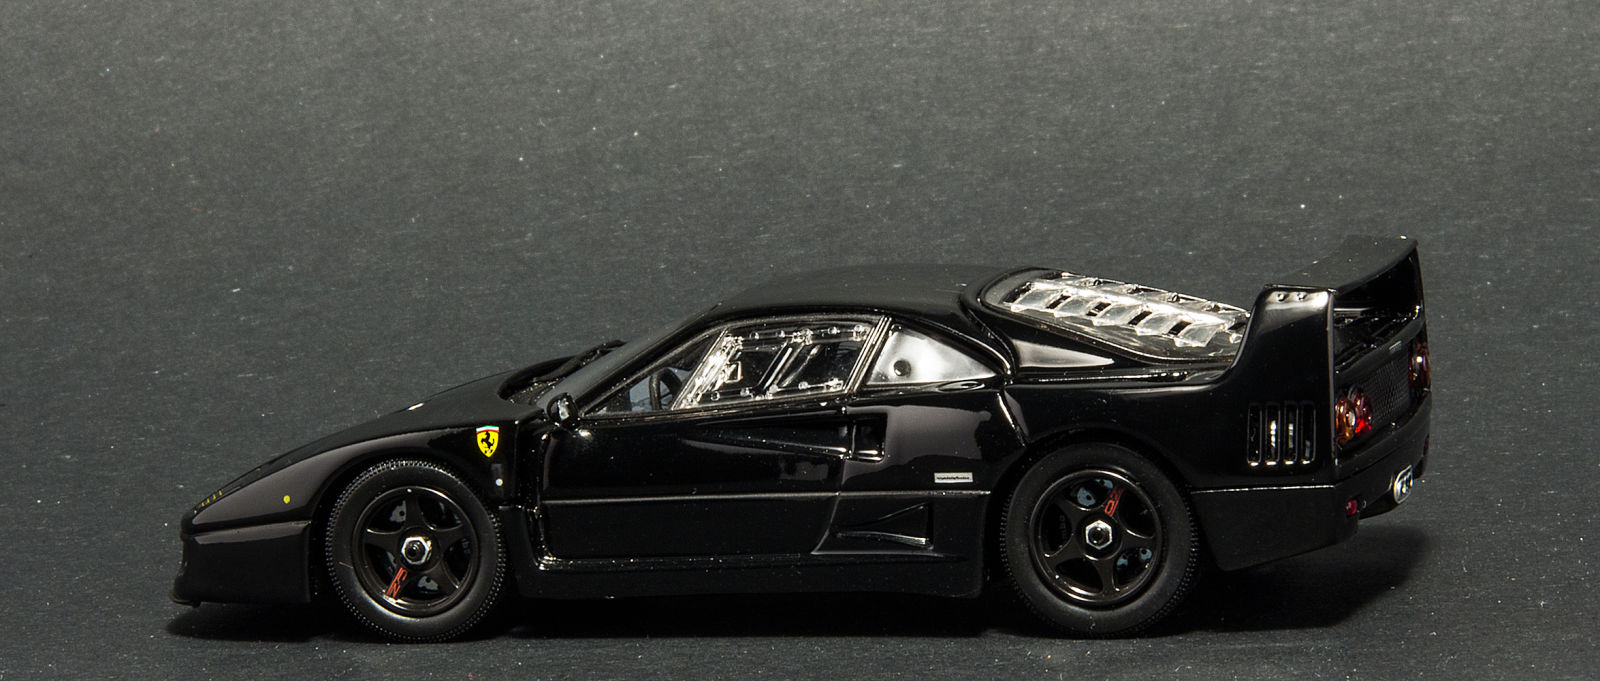 Illustration for article titled Review: Kyosho 1:43 Ferrari F40